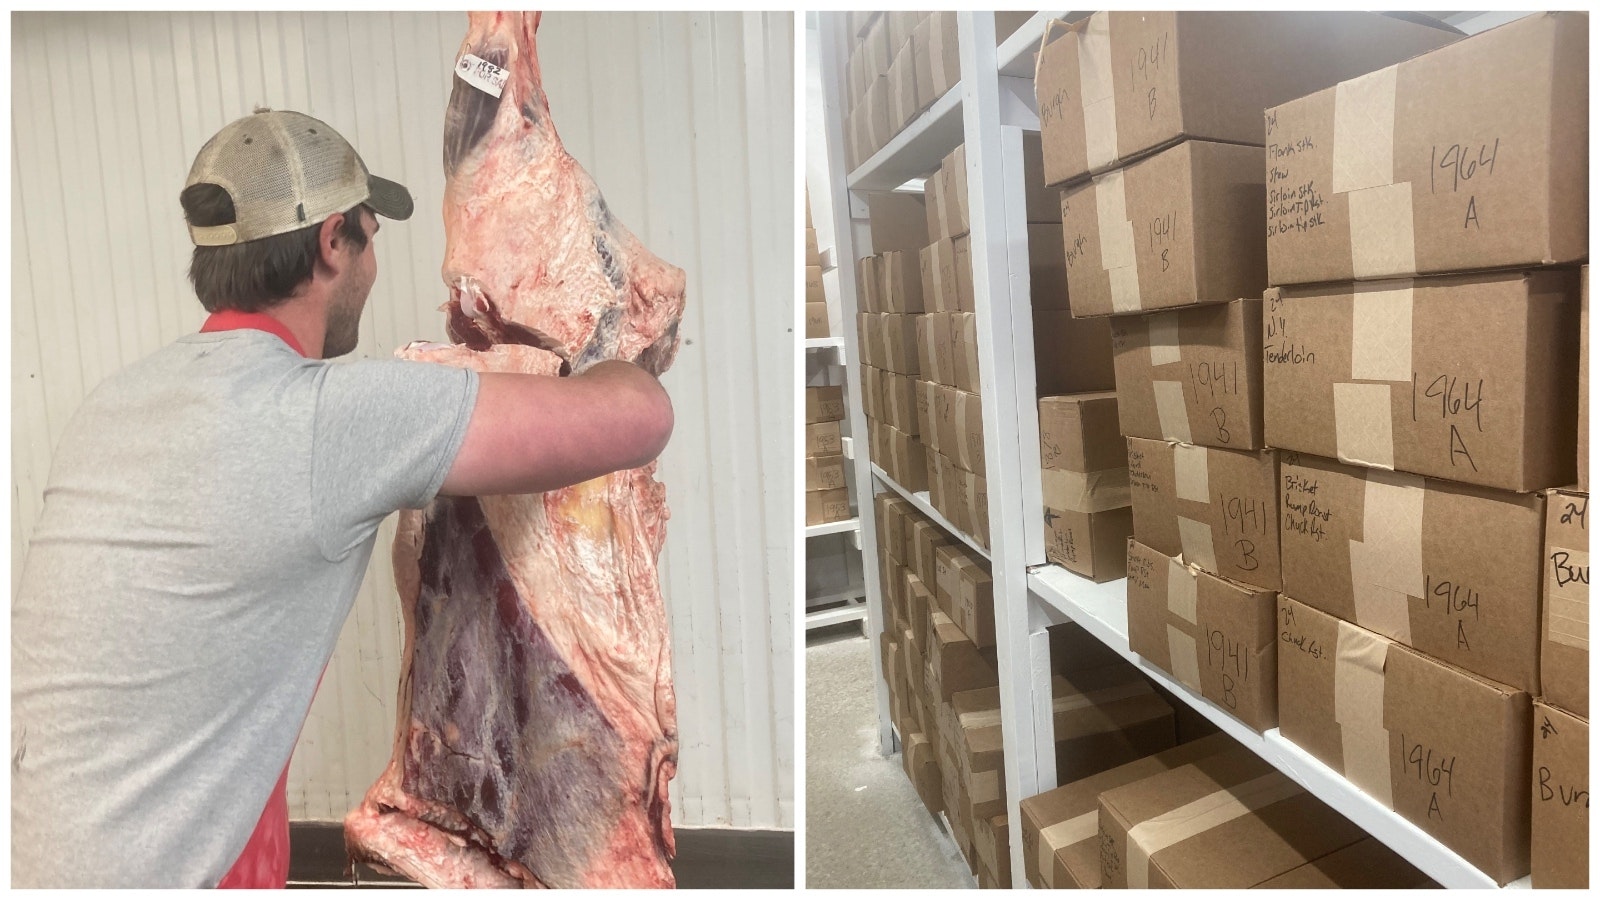 Meat is butchered and packed at 307 Meat Processing in Mills, Wyoming.